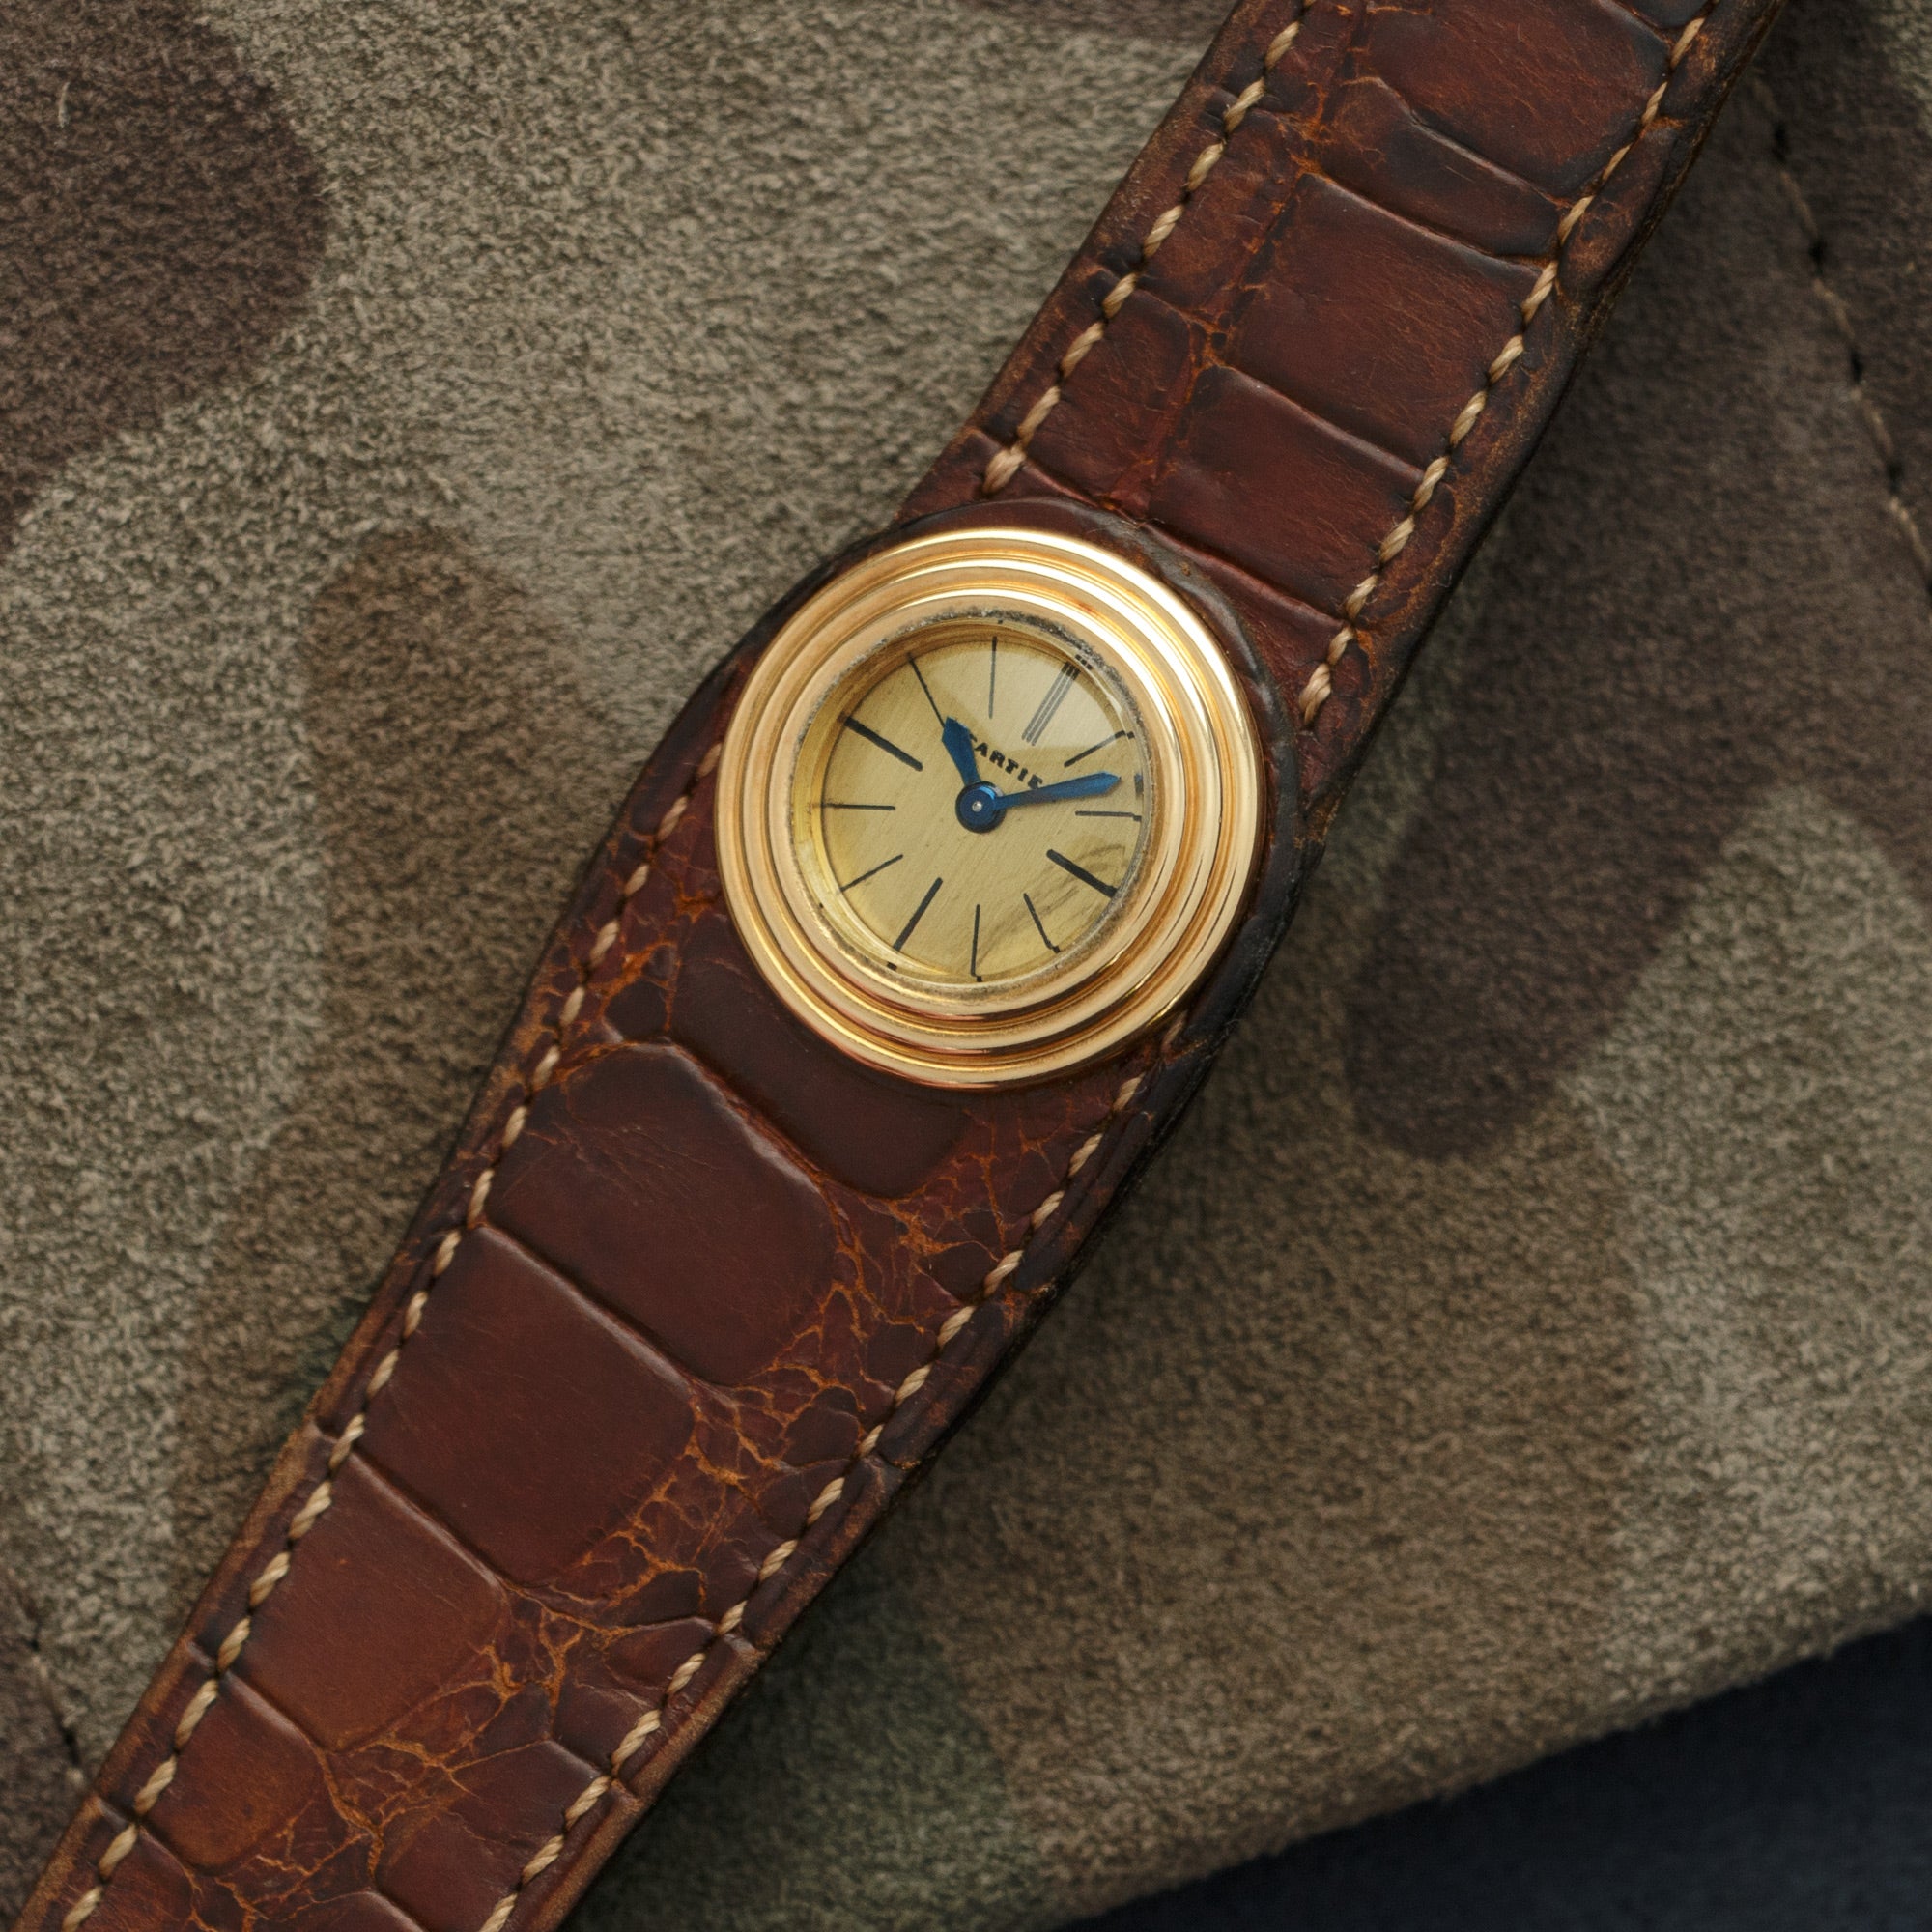 Cartier - Cartier Yellow Gold Leather Watch, As Seen in George Gordons Cartier Book - The Keystone Watches